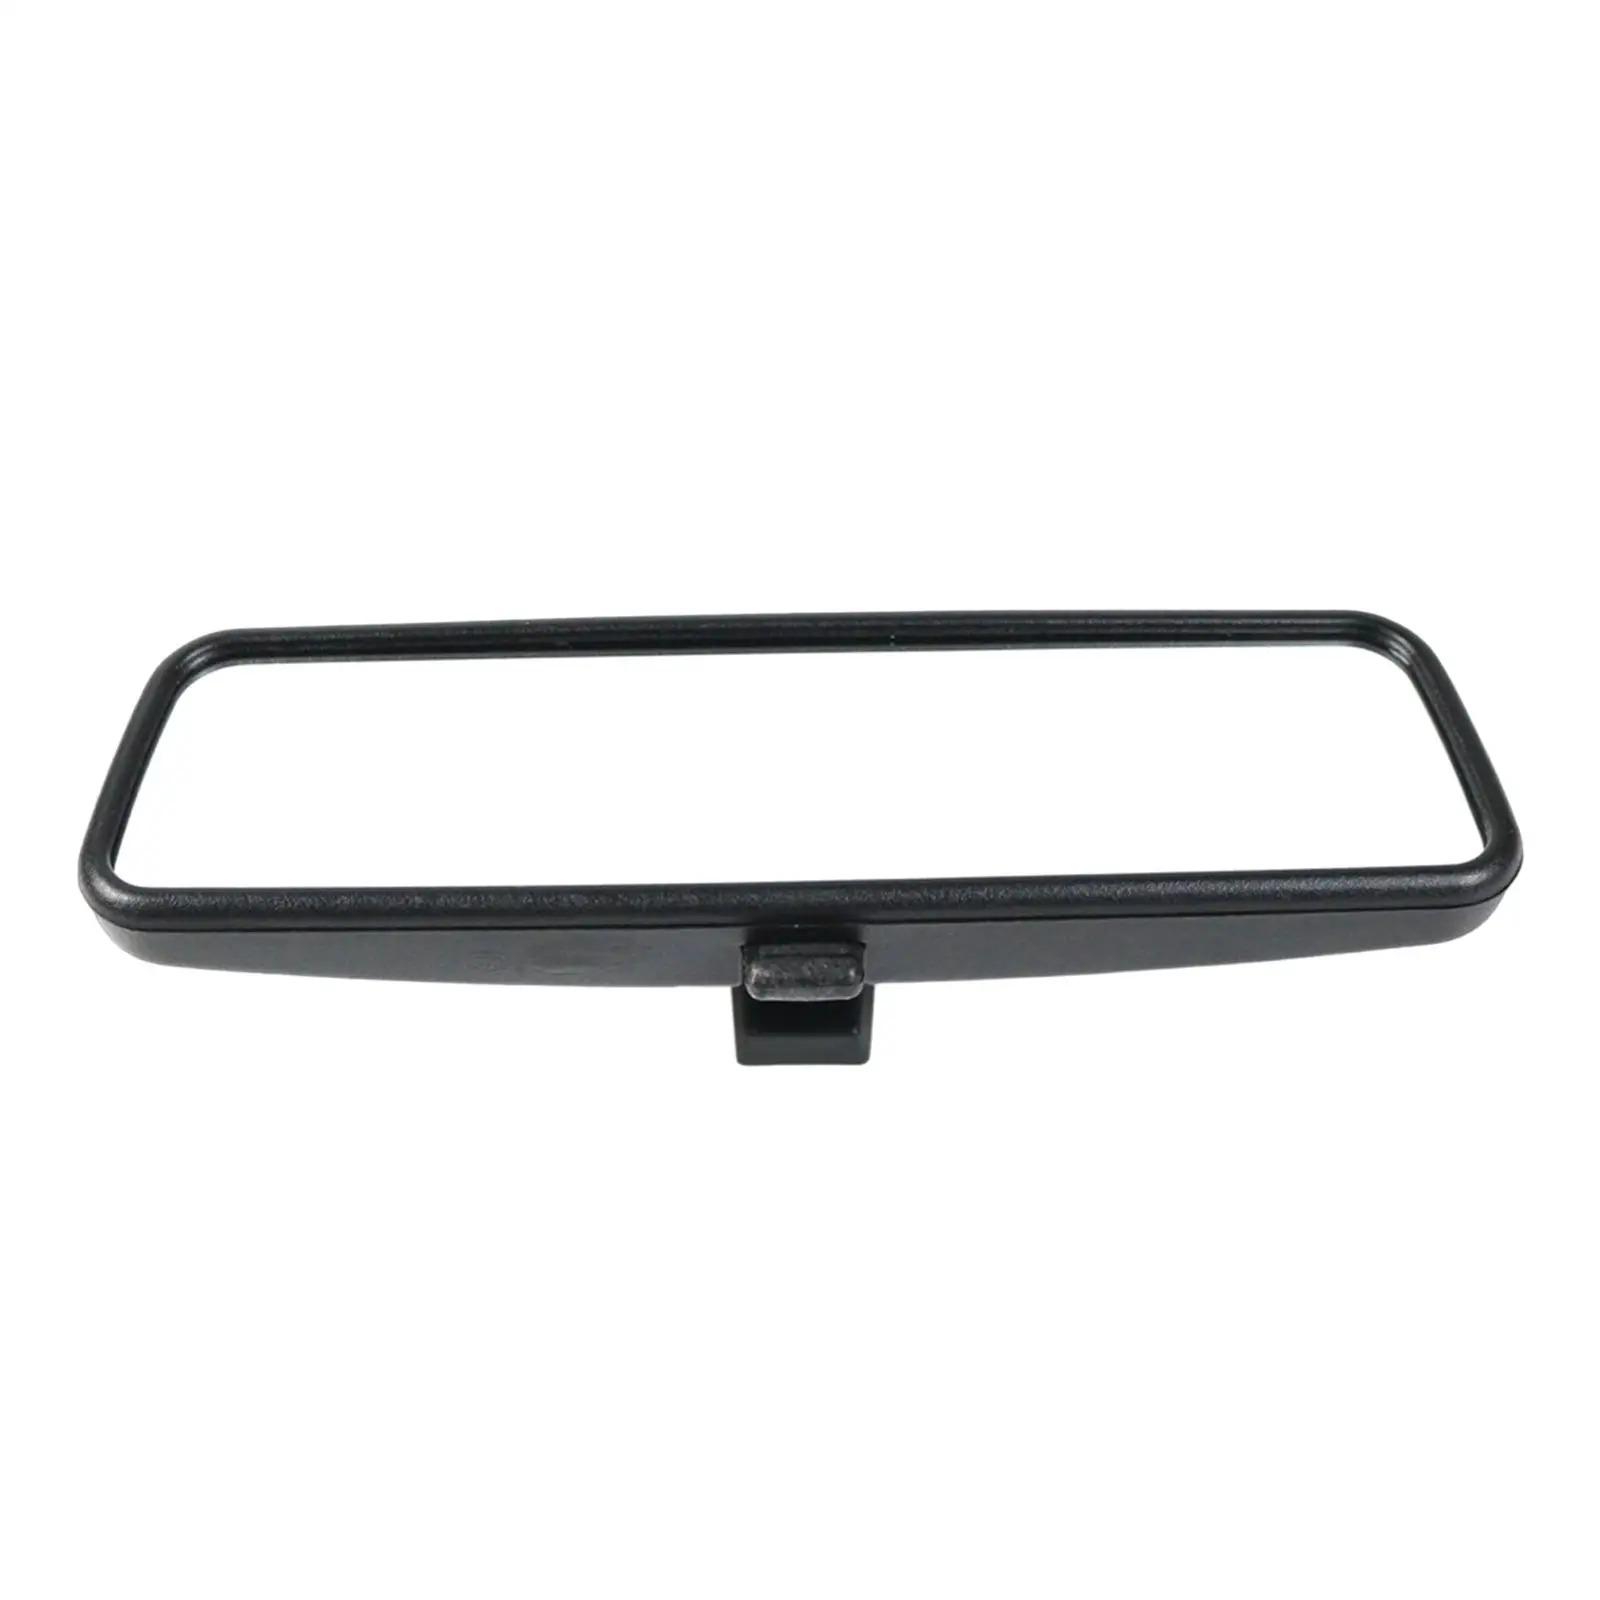 Interior Rear View Mirror 814842 Rearview Mirror for C1 High Performance